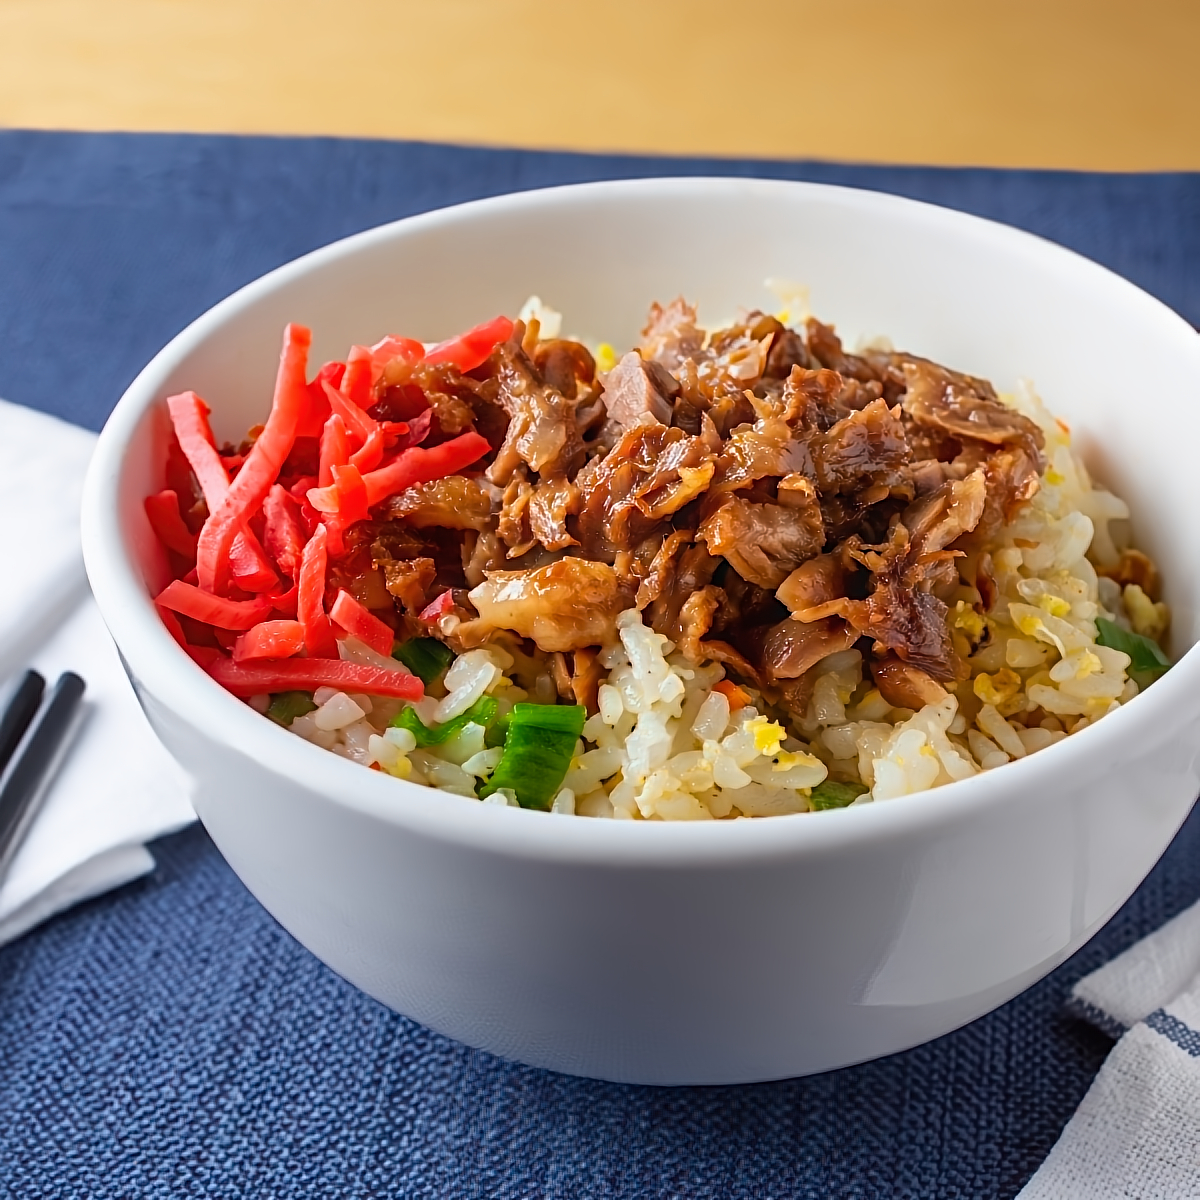 nstant Pot Korean Beef and Rice Recipe